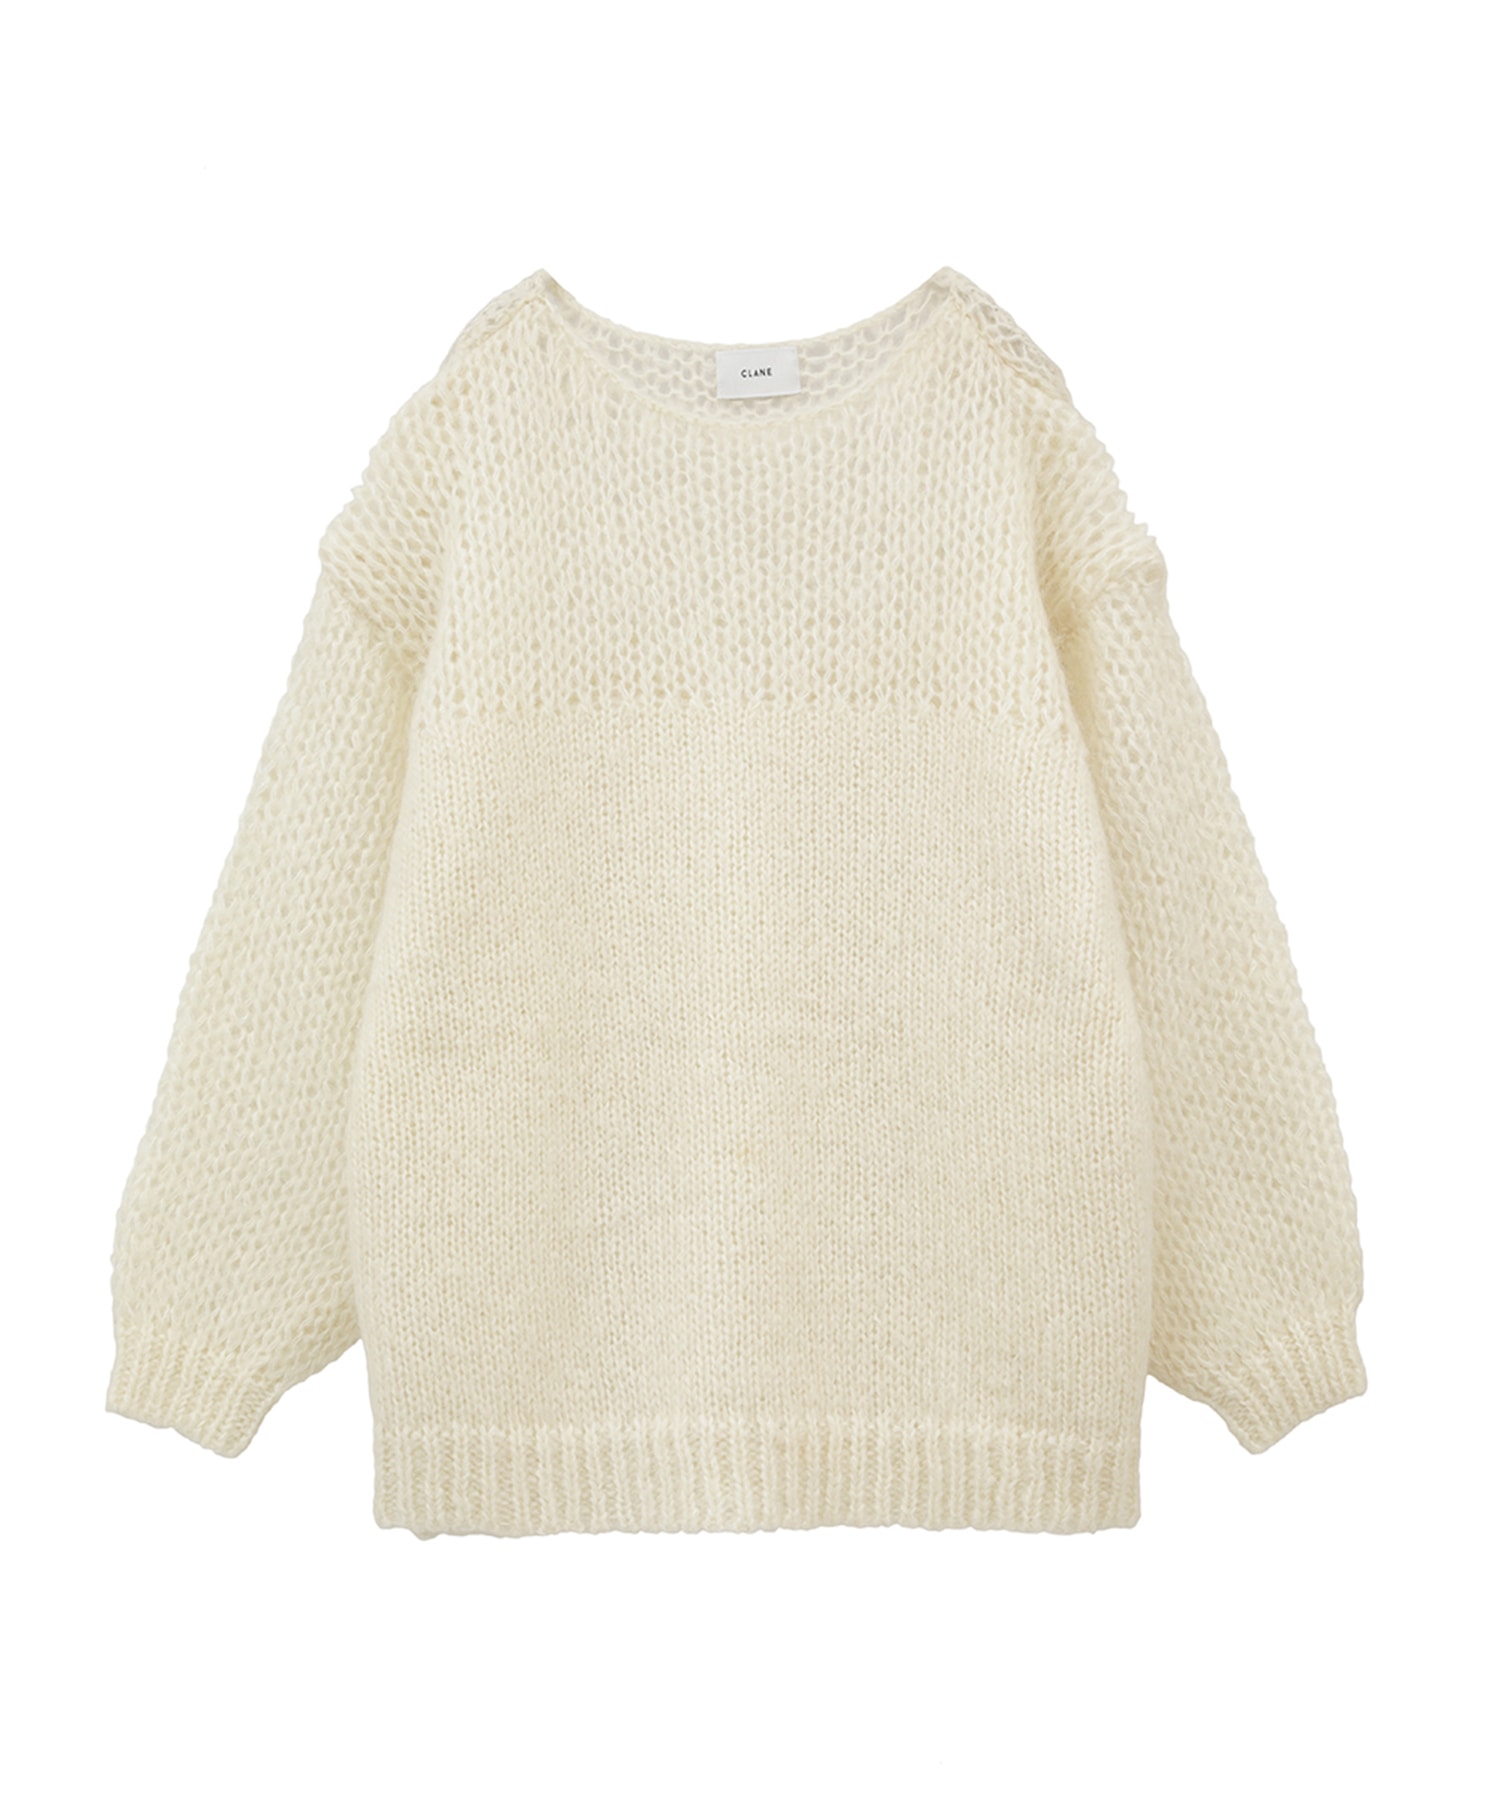 clane V NECK LOOSE MOHAIR KNIT TOPS